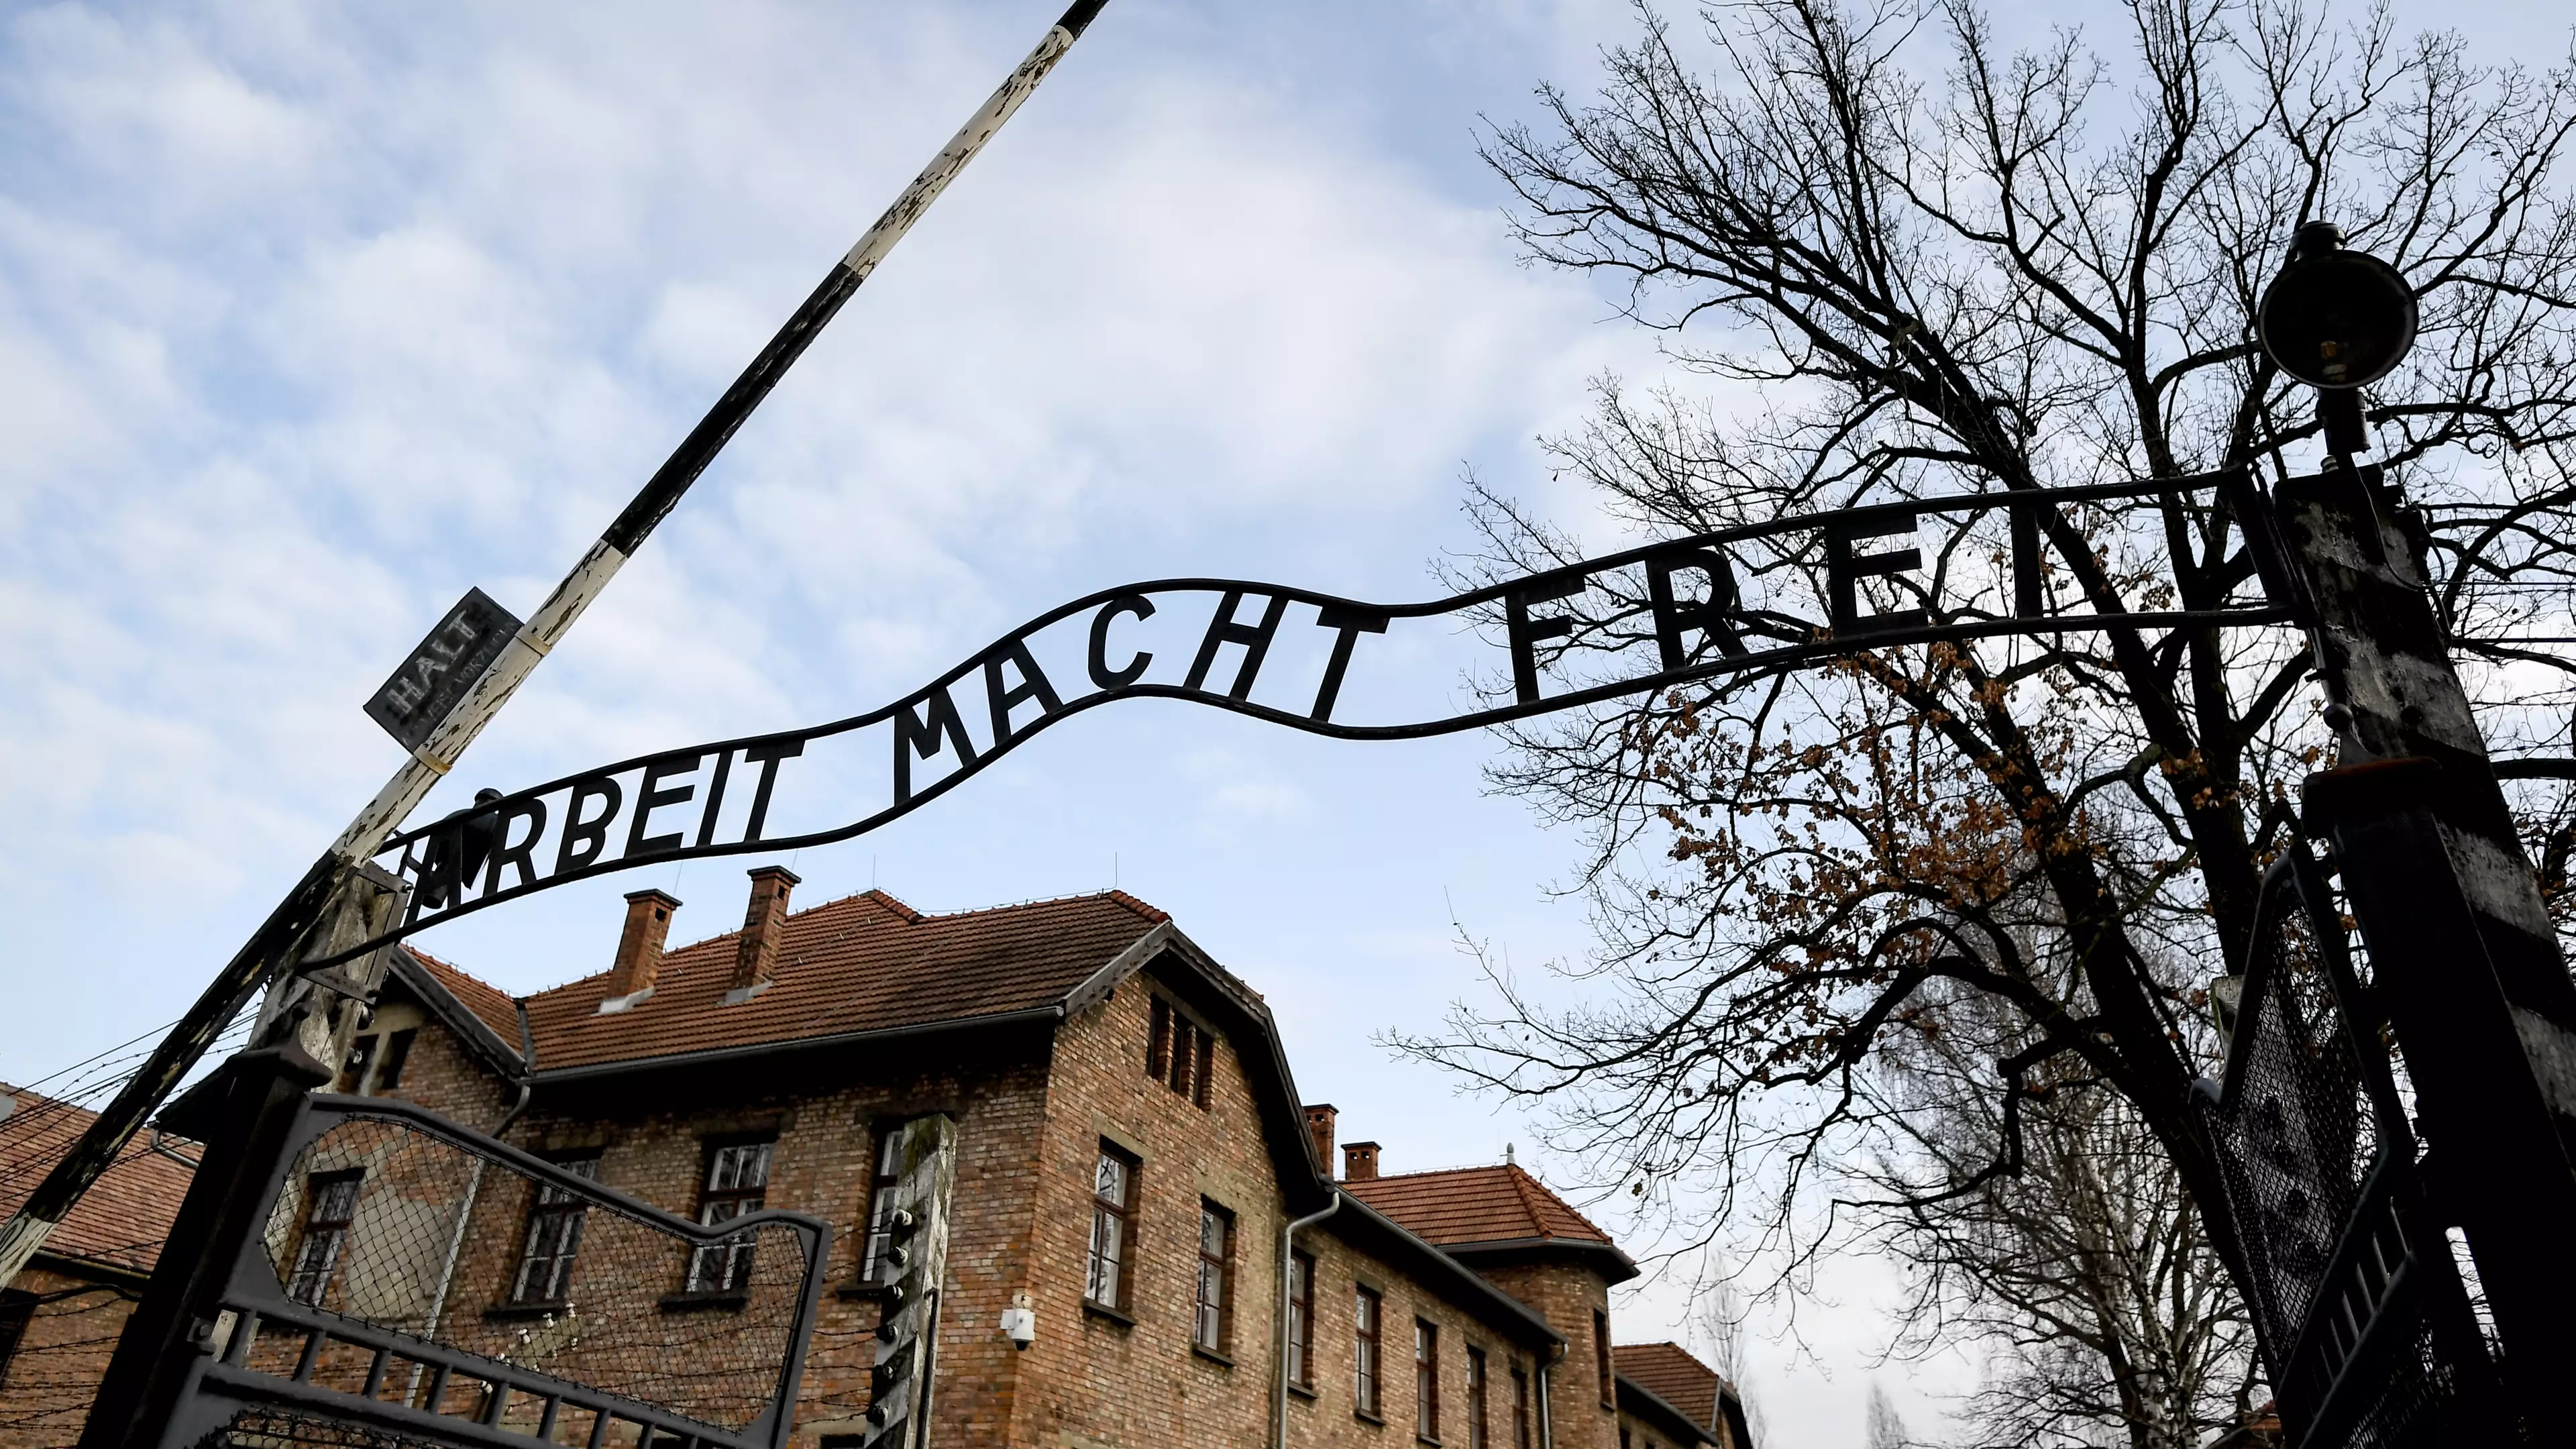 The Auschwitz Memorial Has Asked TikTok Users To Stop Dressing Up As Holocaust Victims